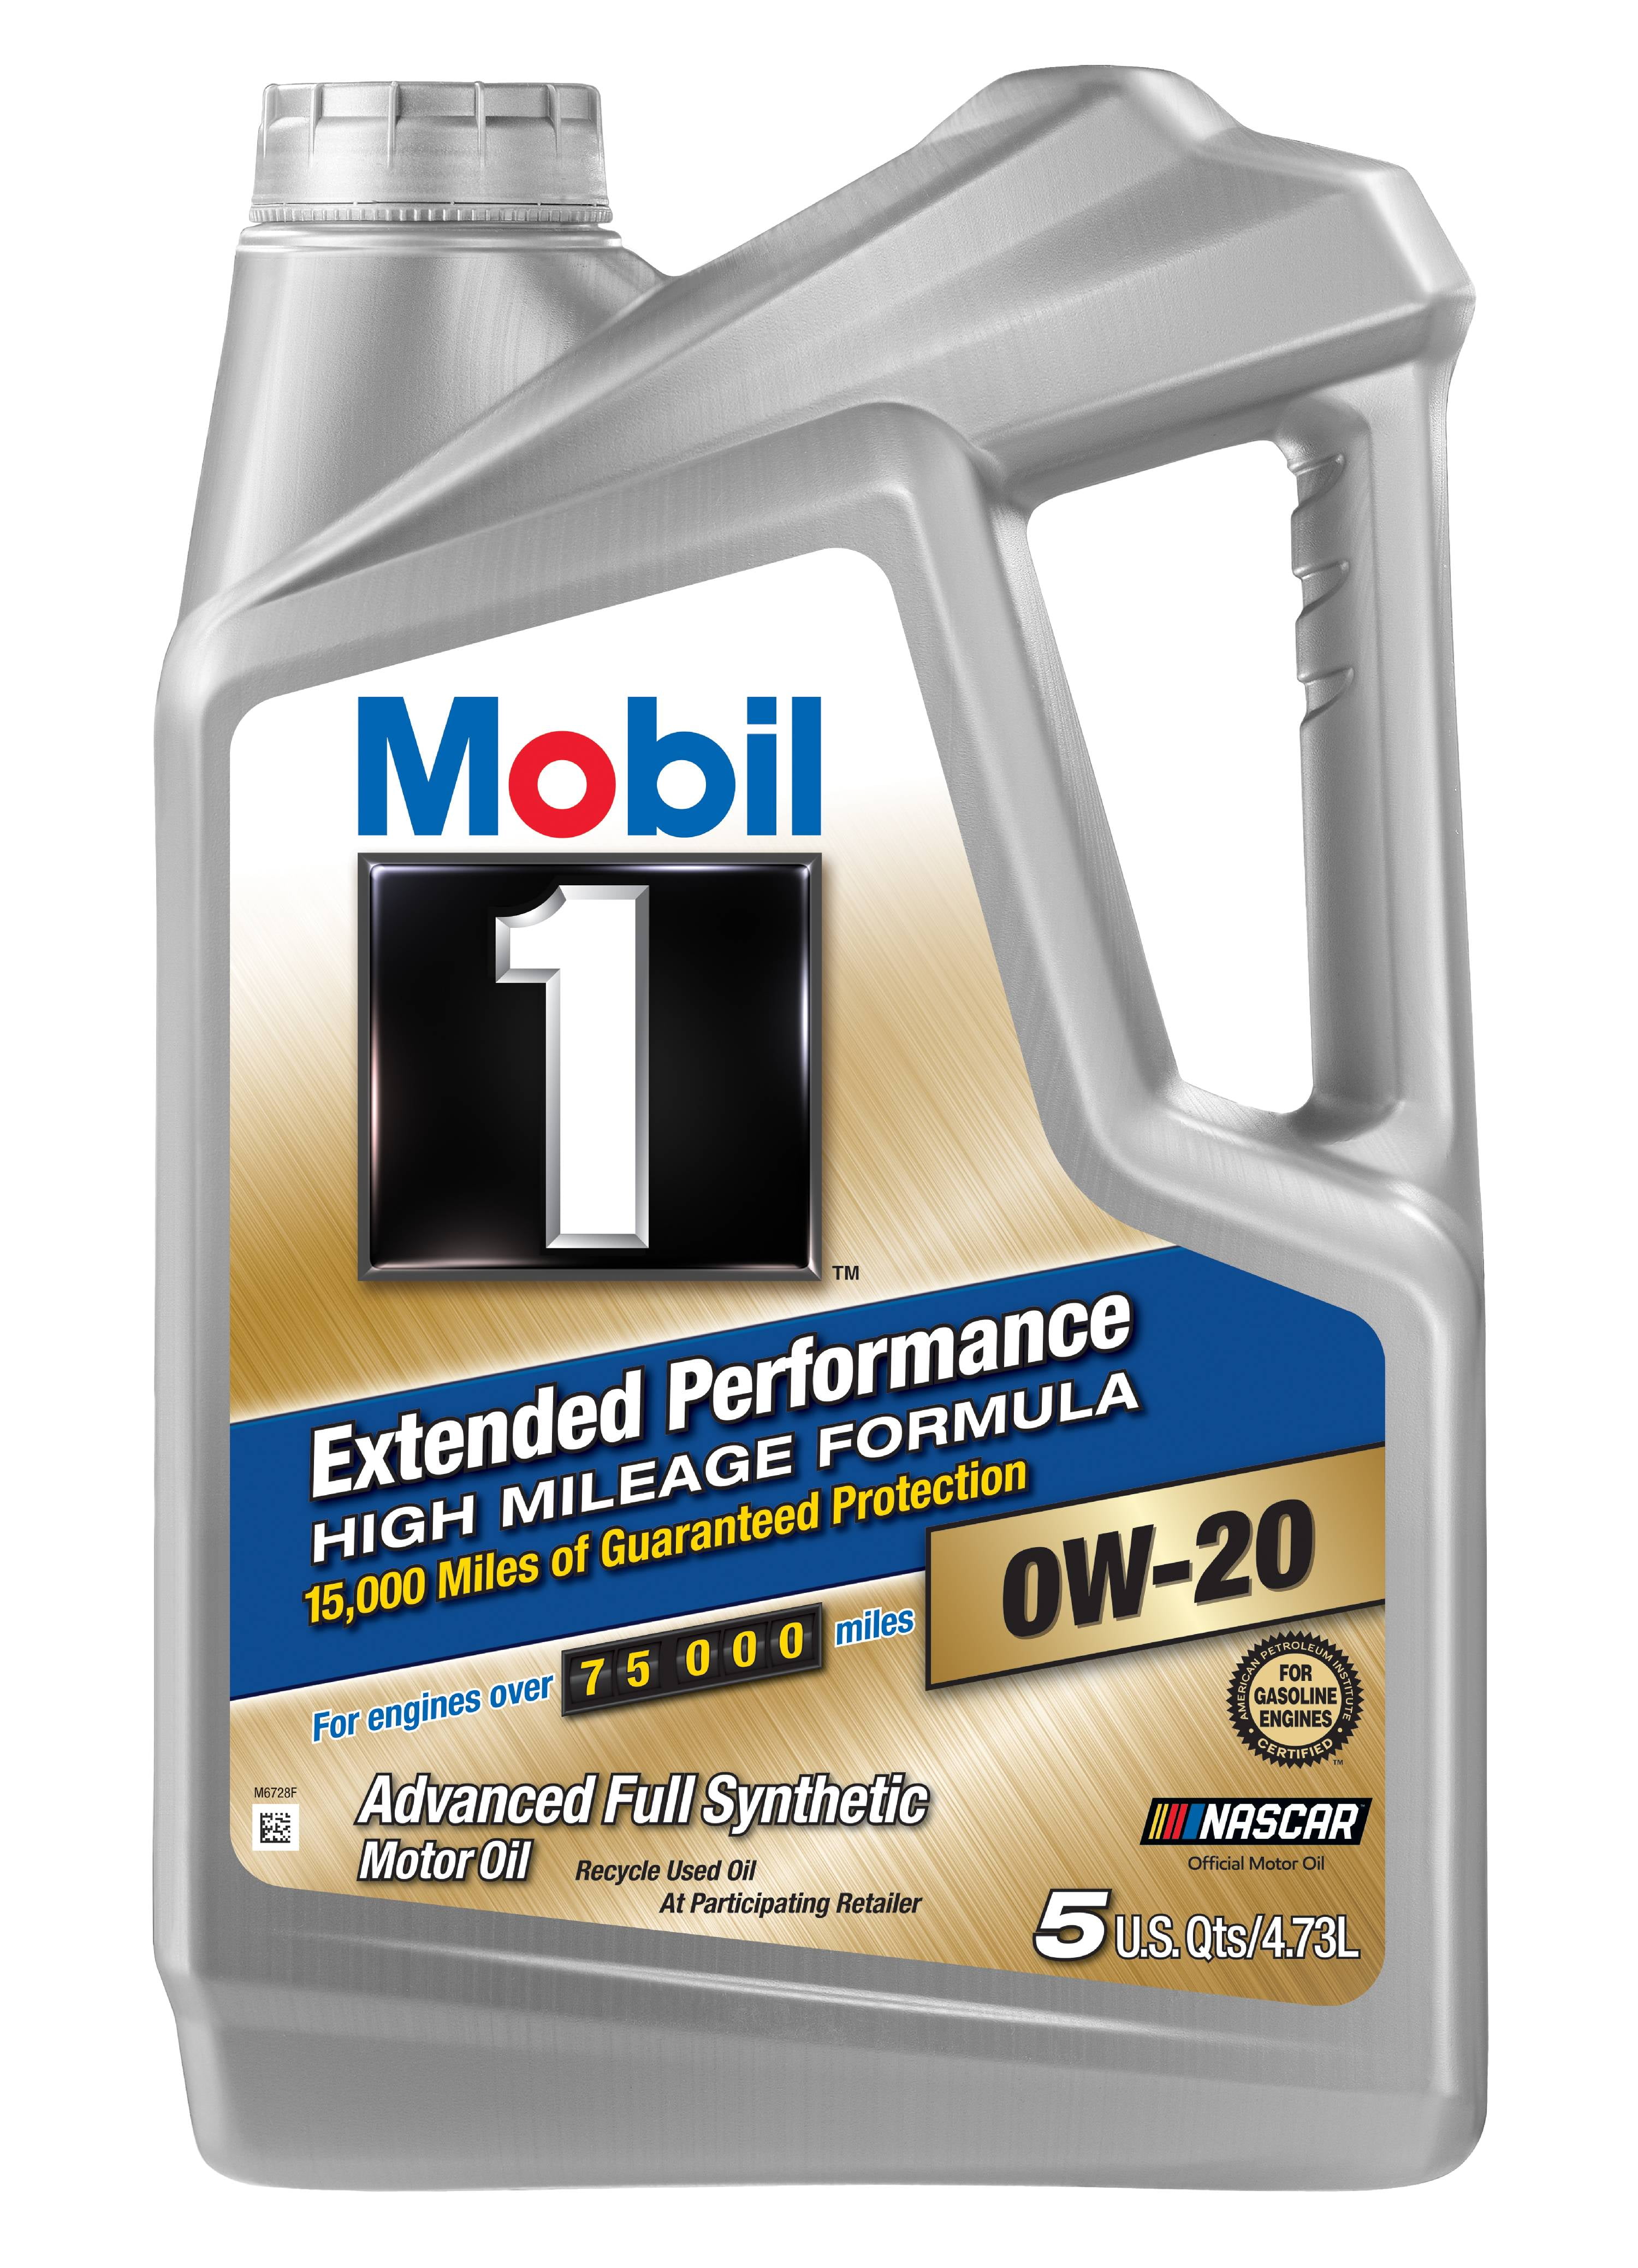 mobil-1-extended-performance-high-mileage-formula-motor-oil-0w-20-5-qt